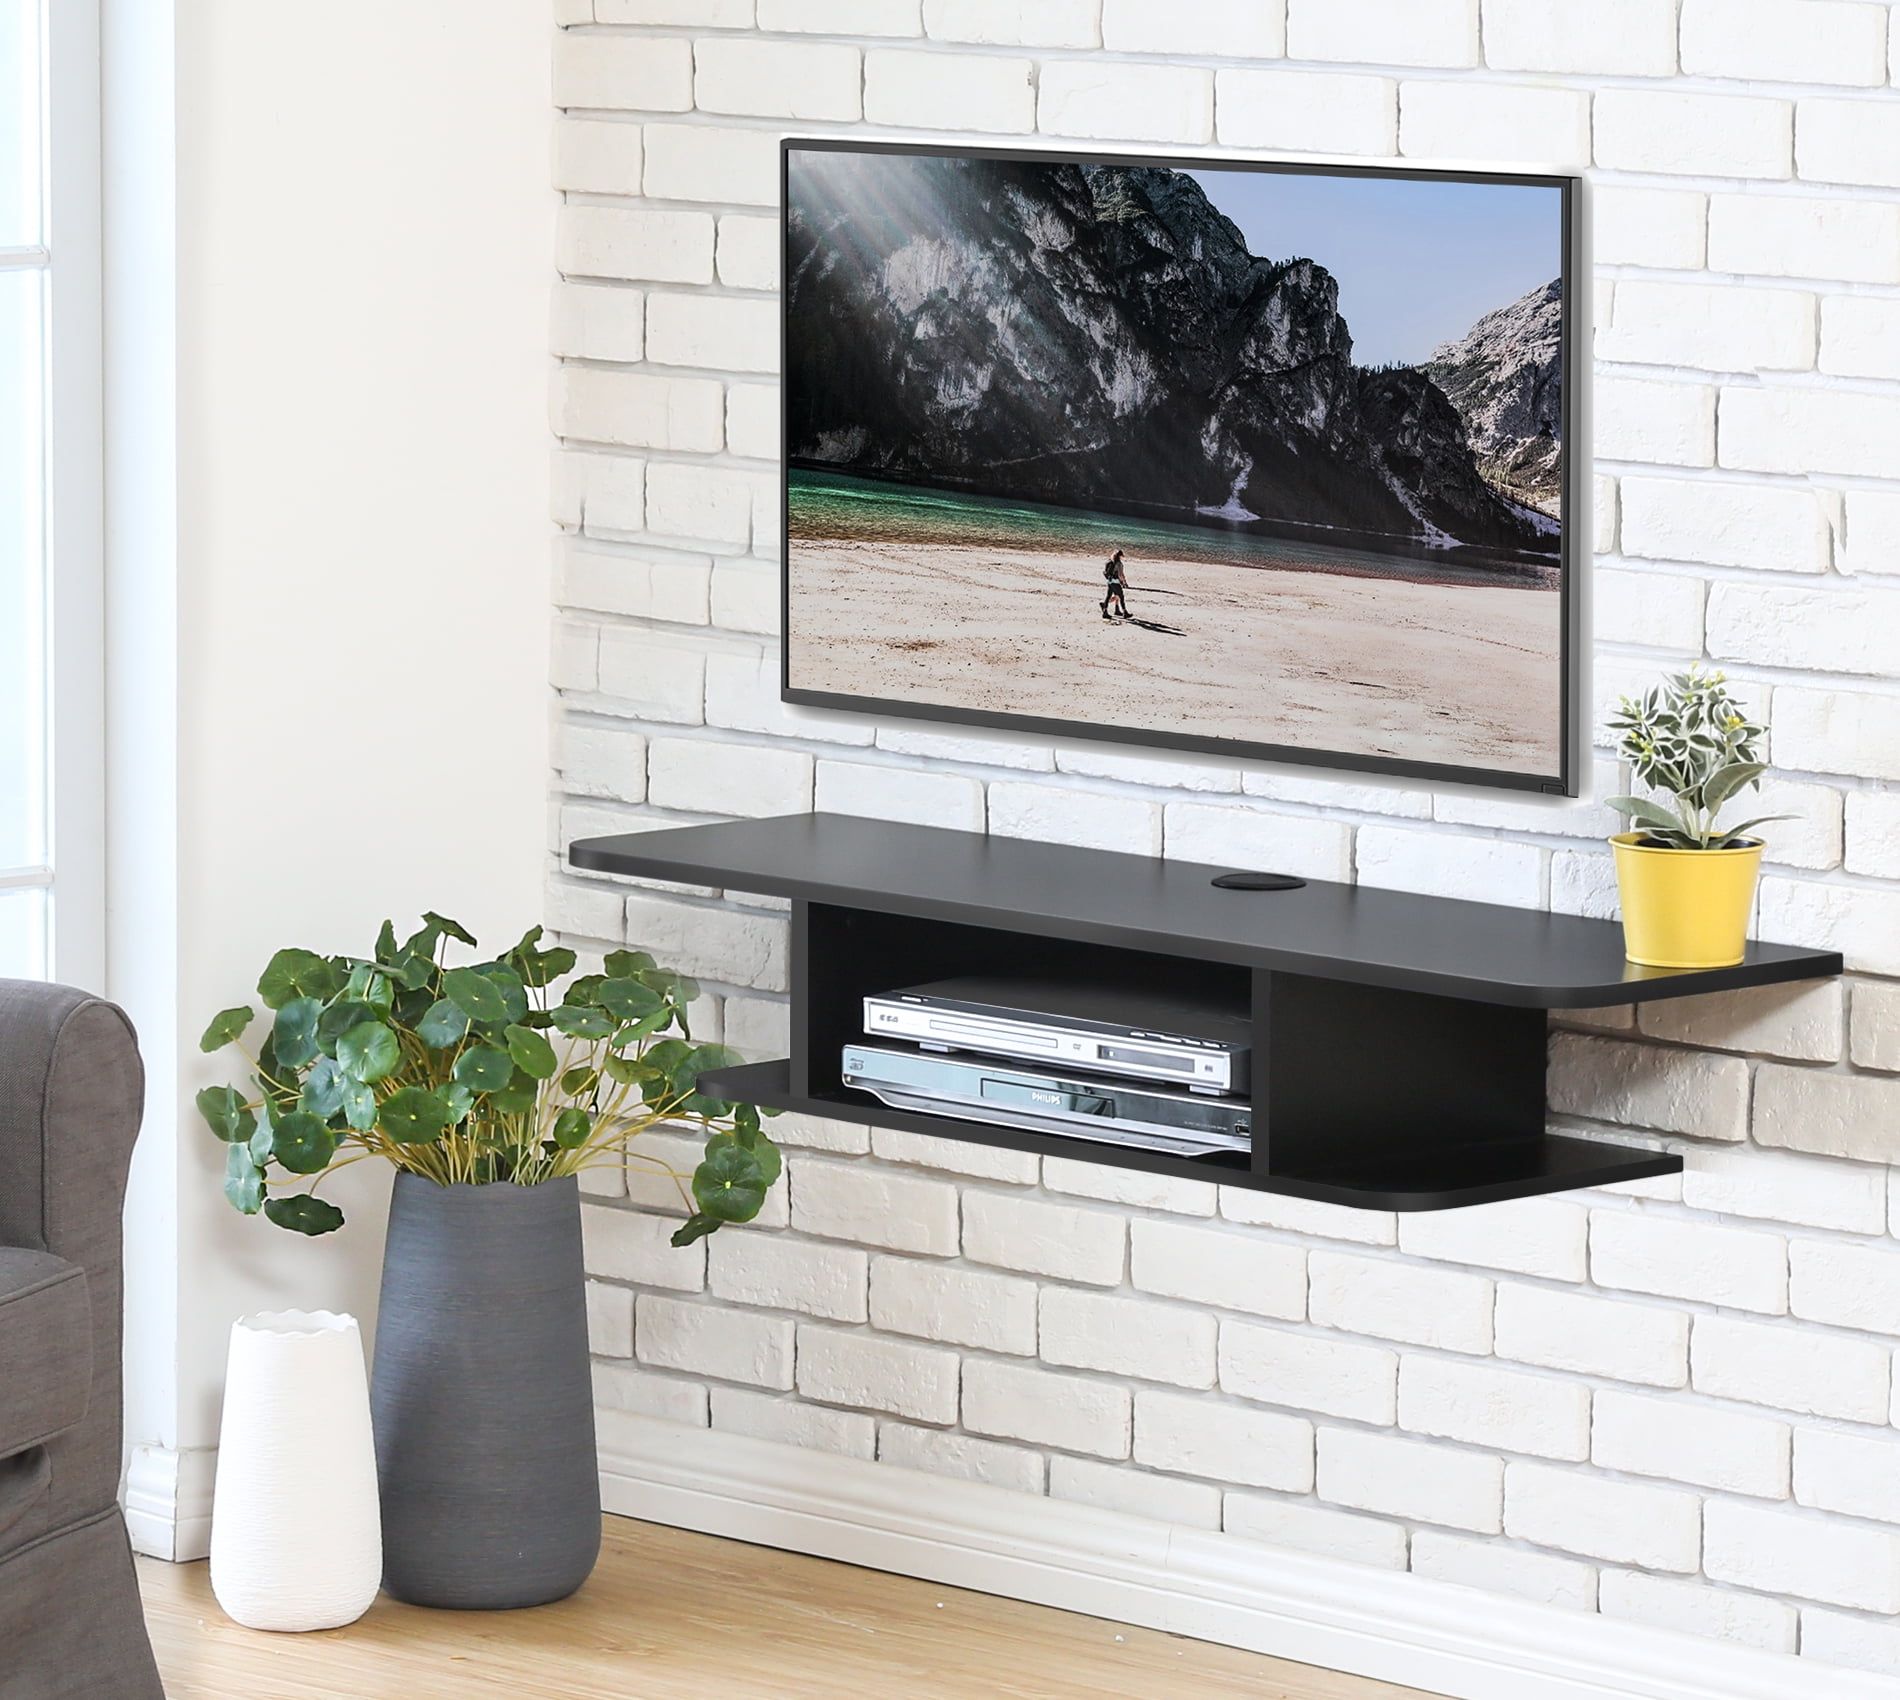 Fitueyes Wall Mounted Media Console,floating Tv Stand Component Shelf Regarding Wall Mounted Floating Tv Stands (View 18 of 20)